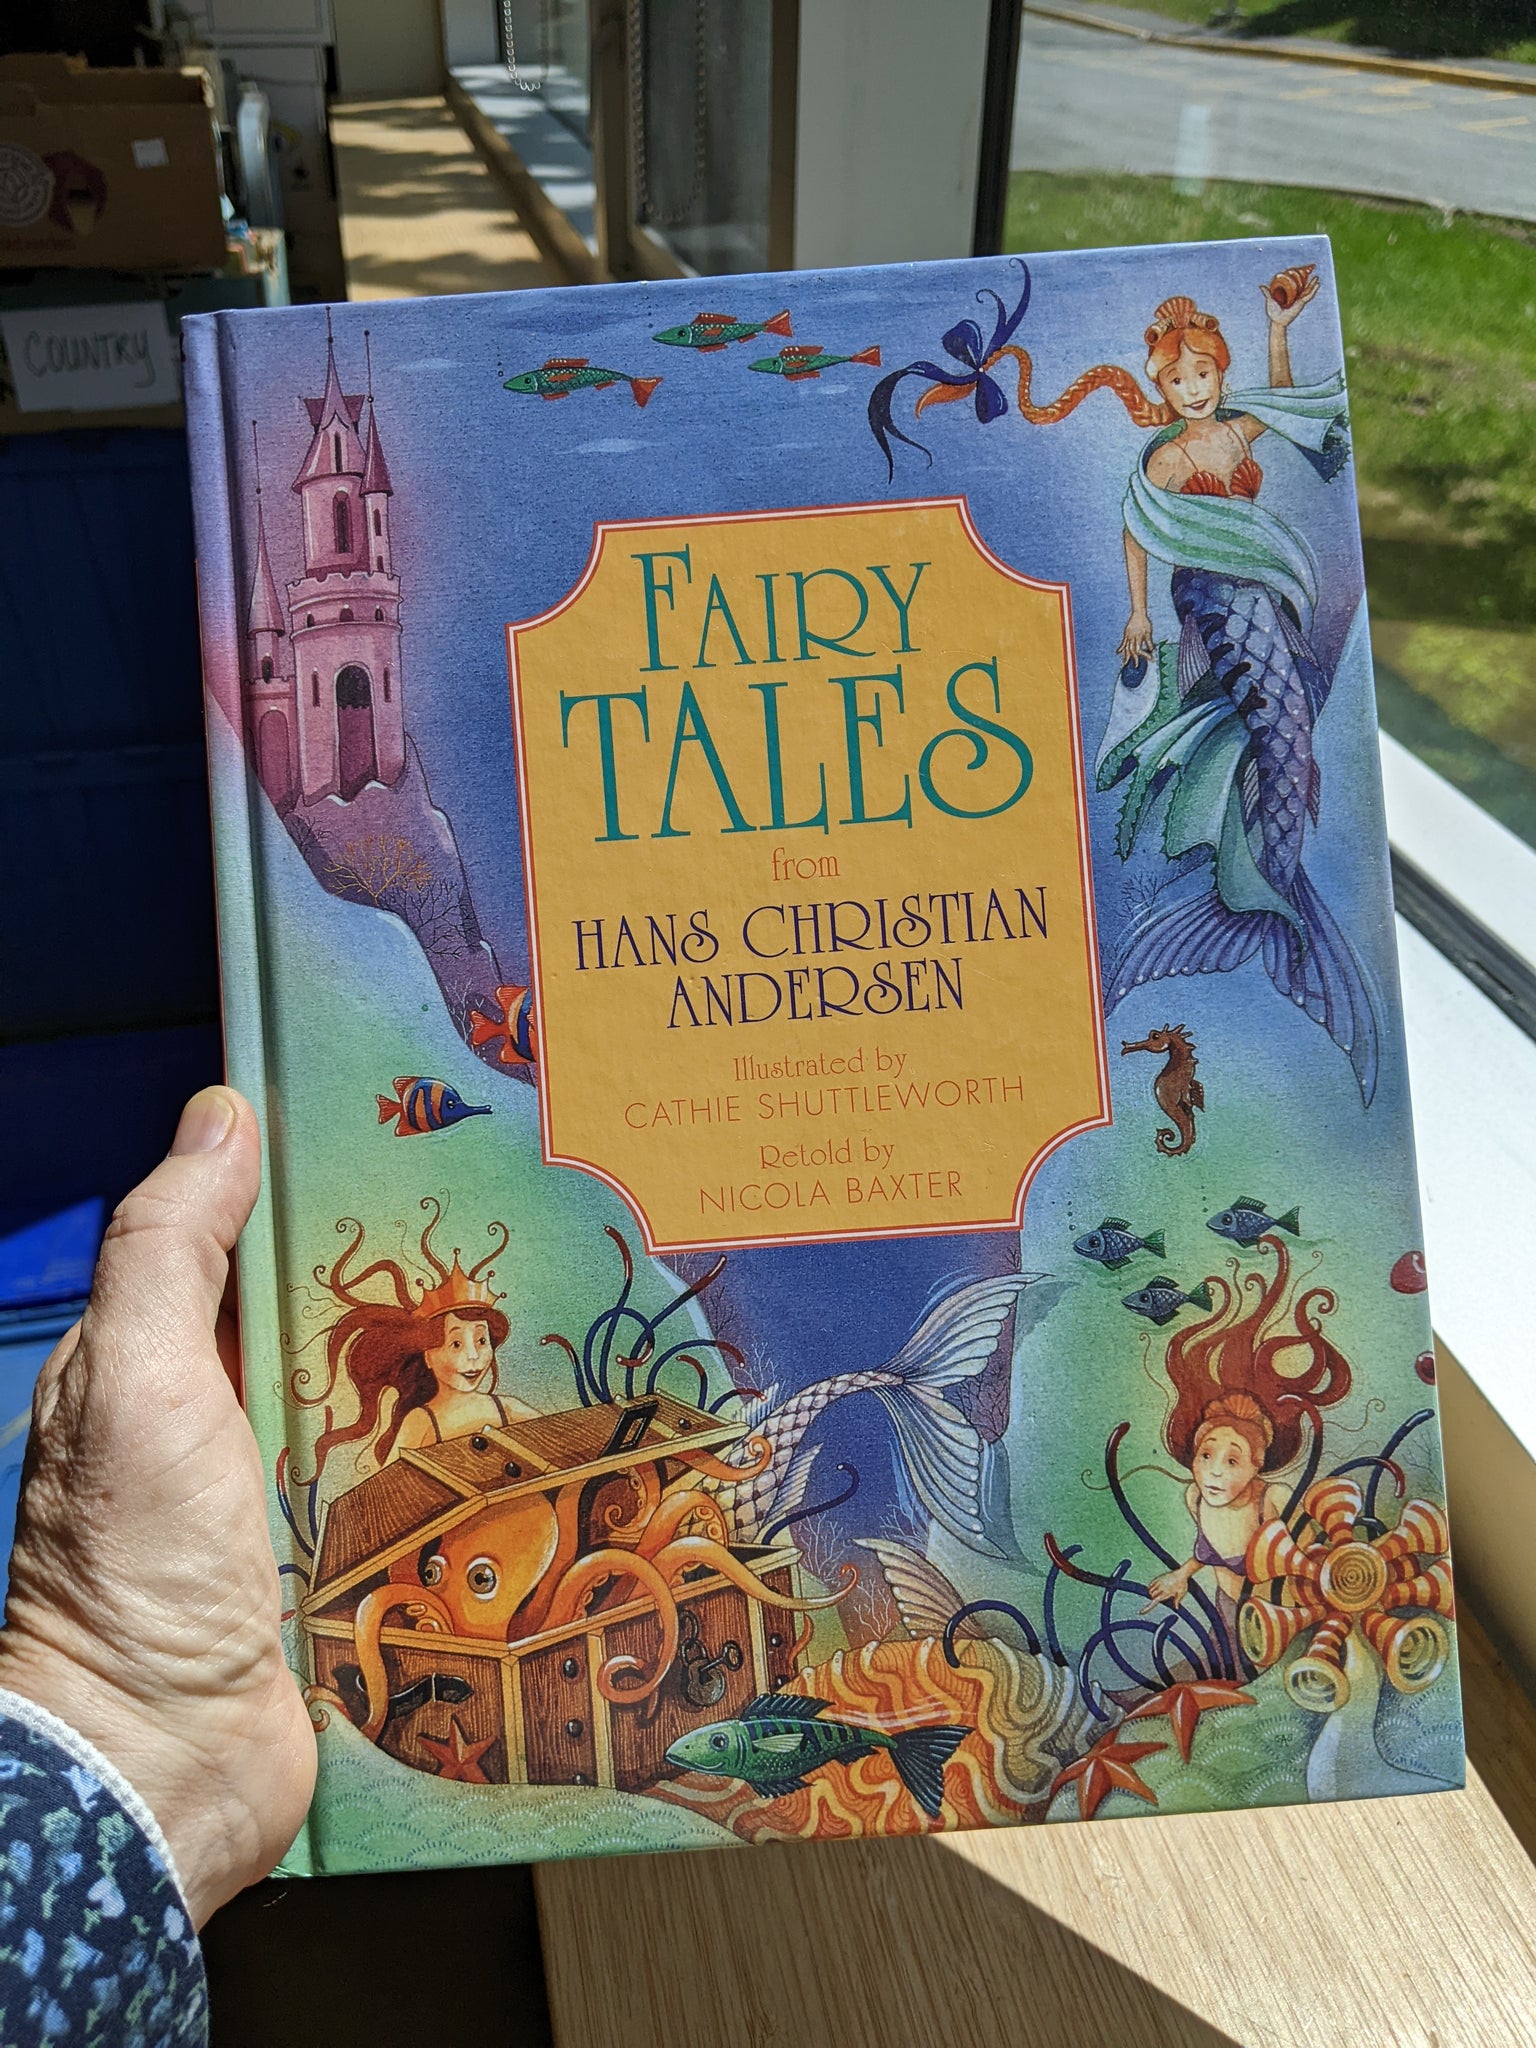 Fairy Tales From Hans Christian Andersen